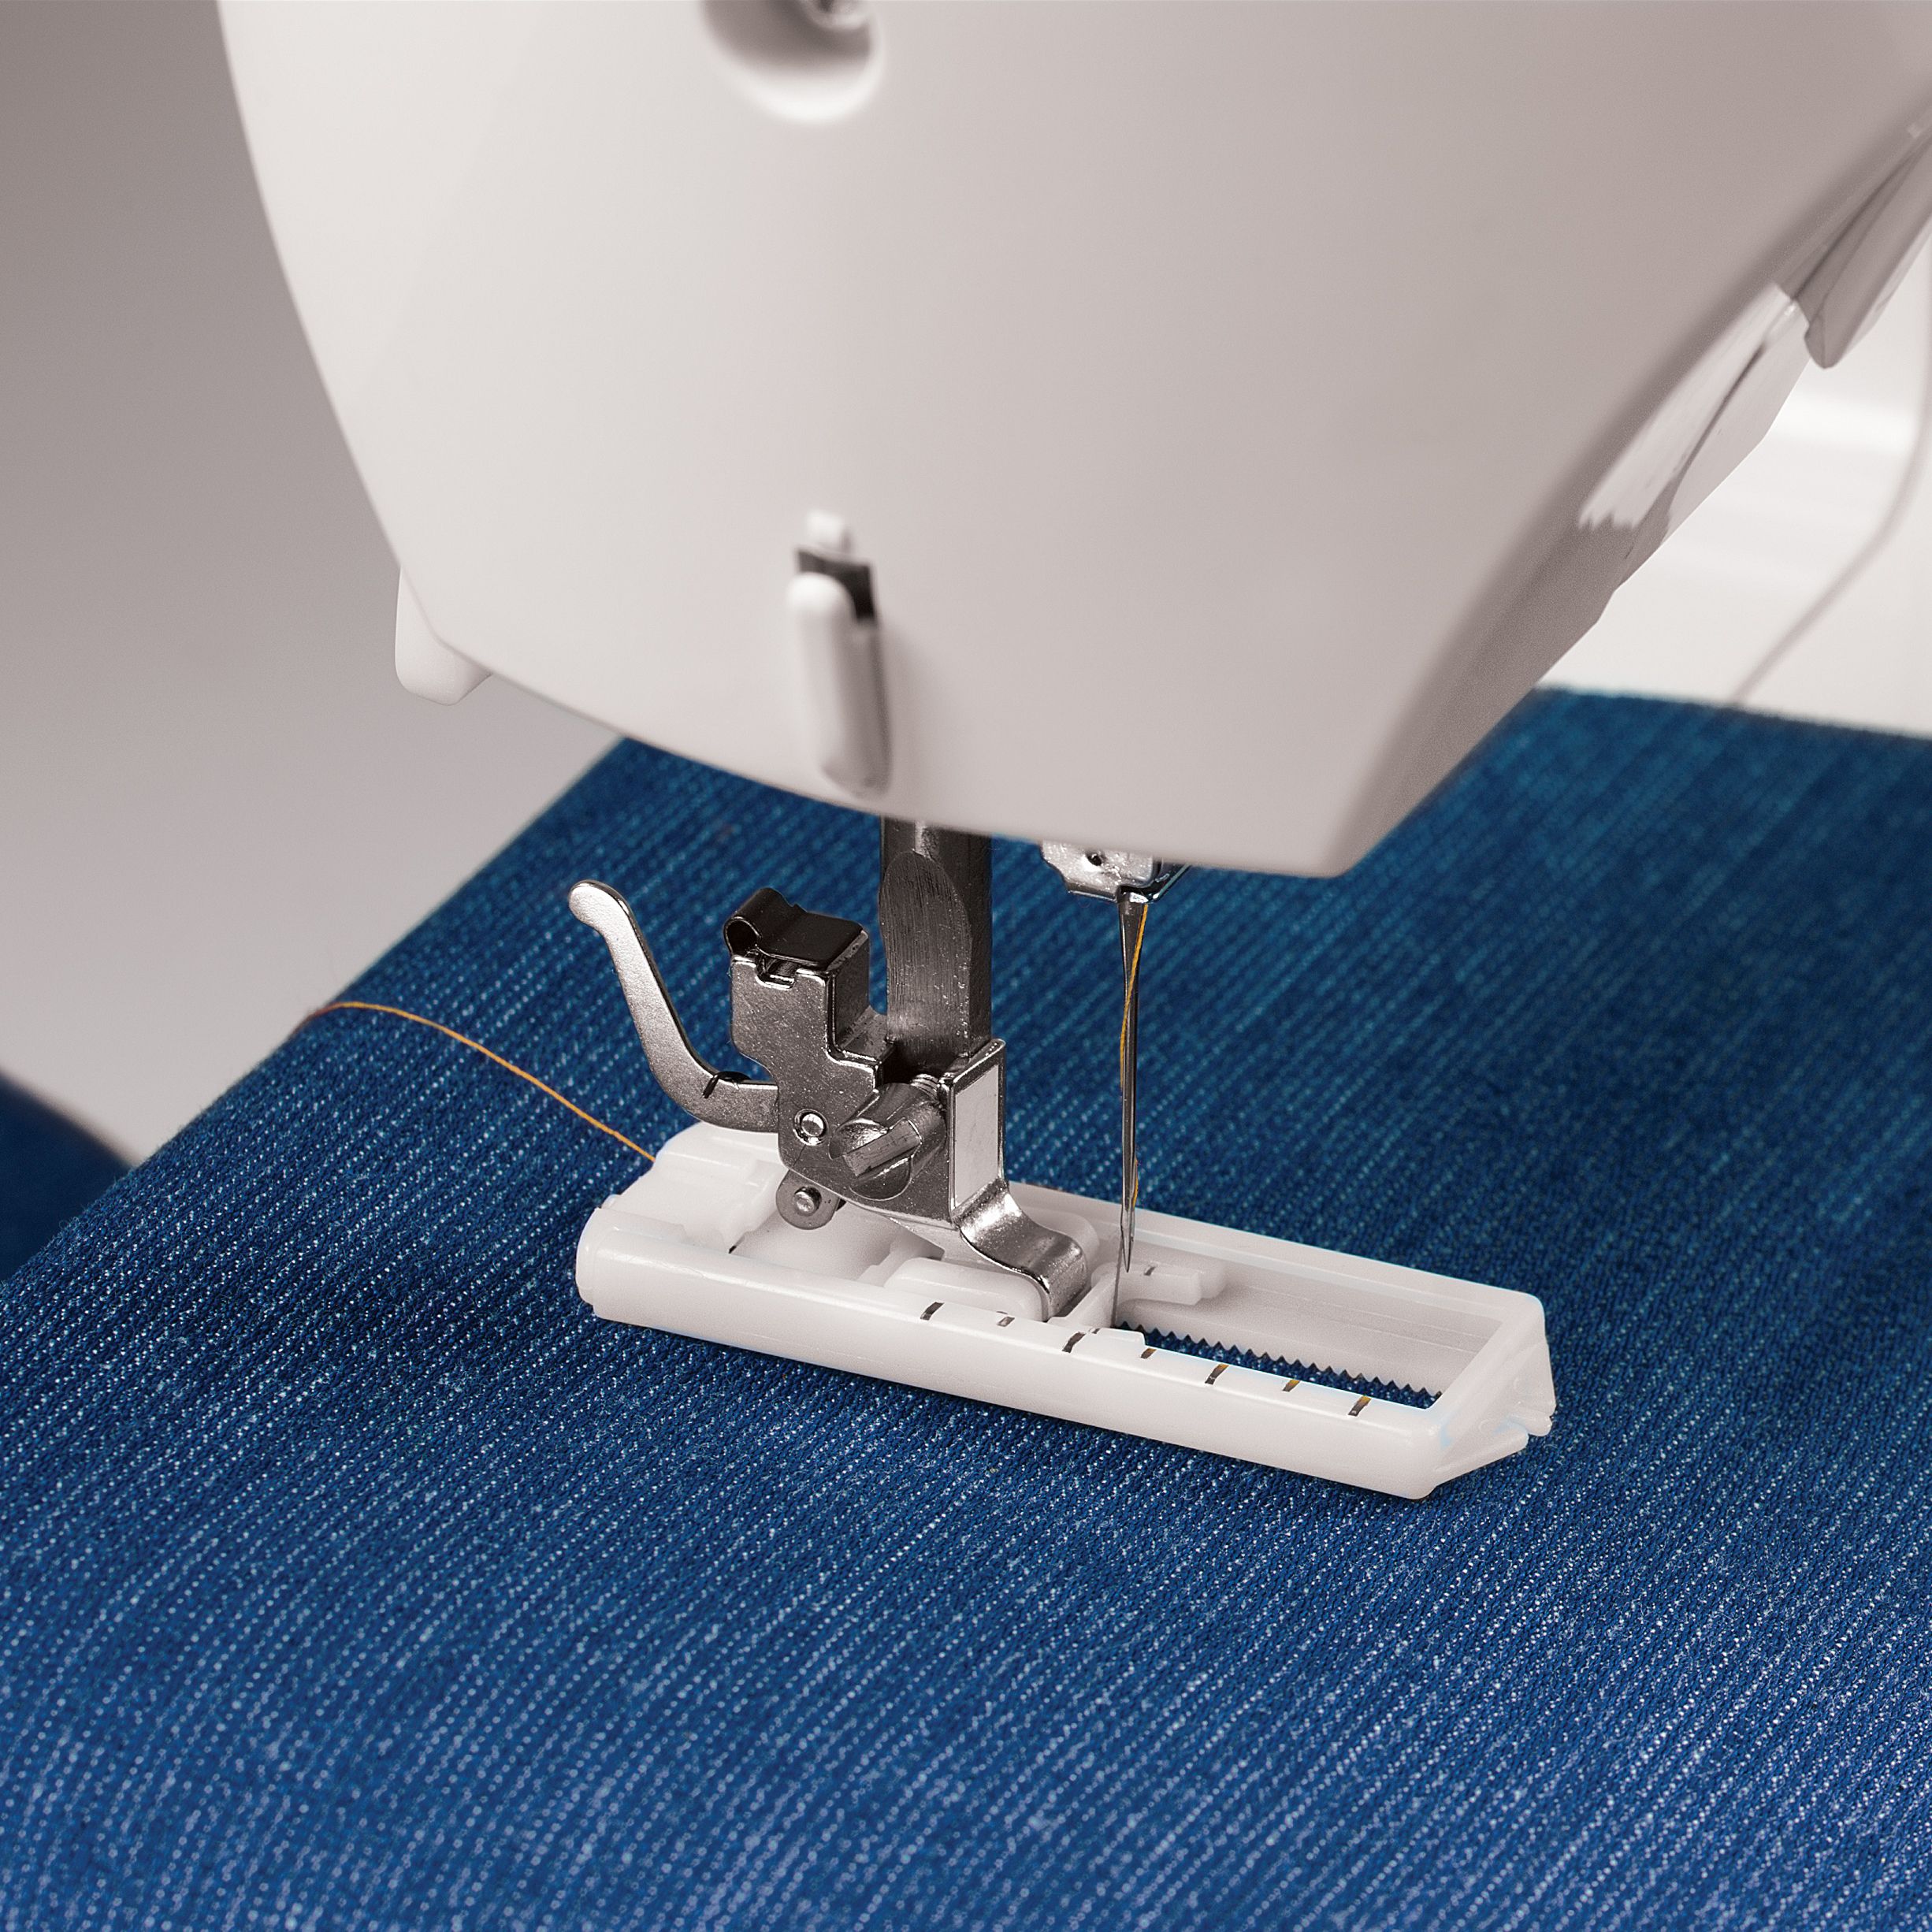 SINGER® Simple™ 2263 Sewing Machine with 97 Stitch Applications - image 5 of 13